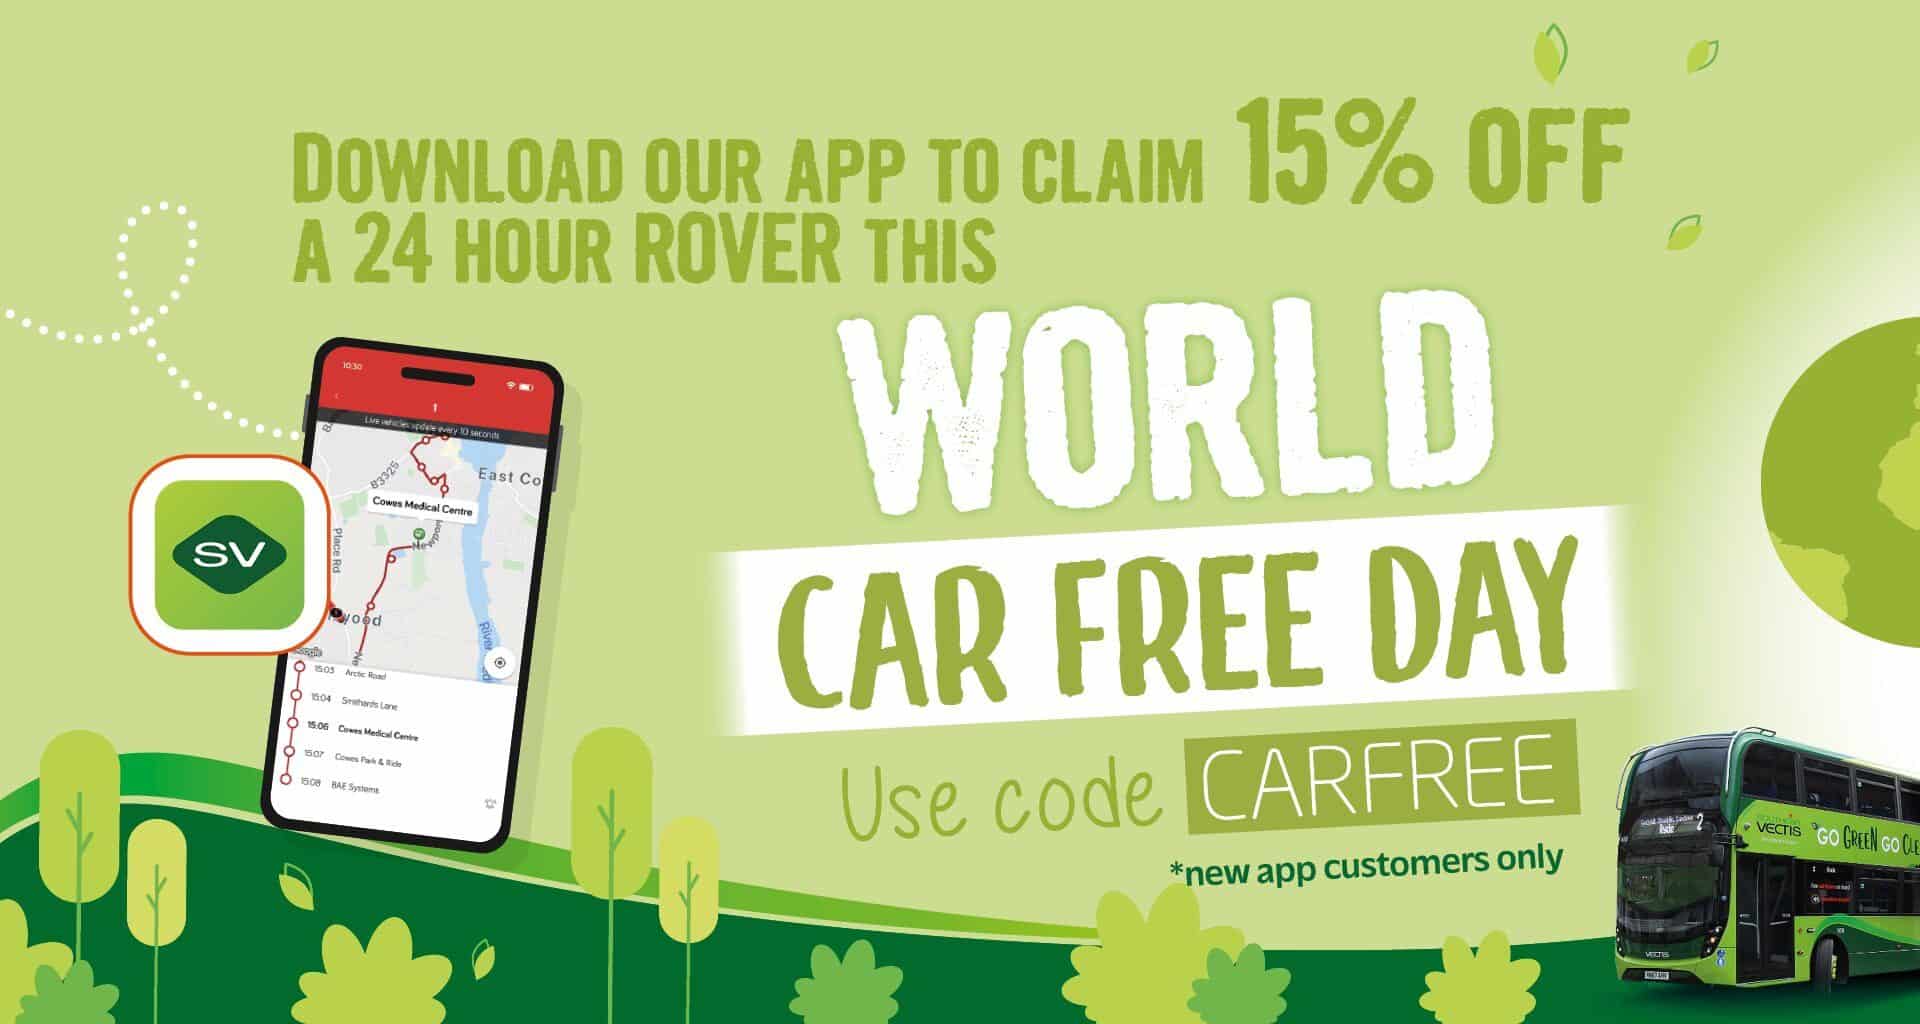 World Car Free Day discount advert for Southern Vectis